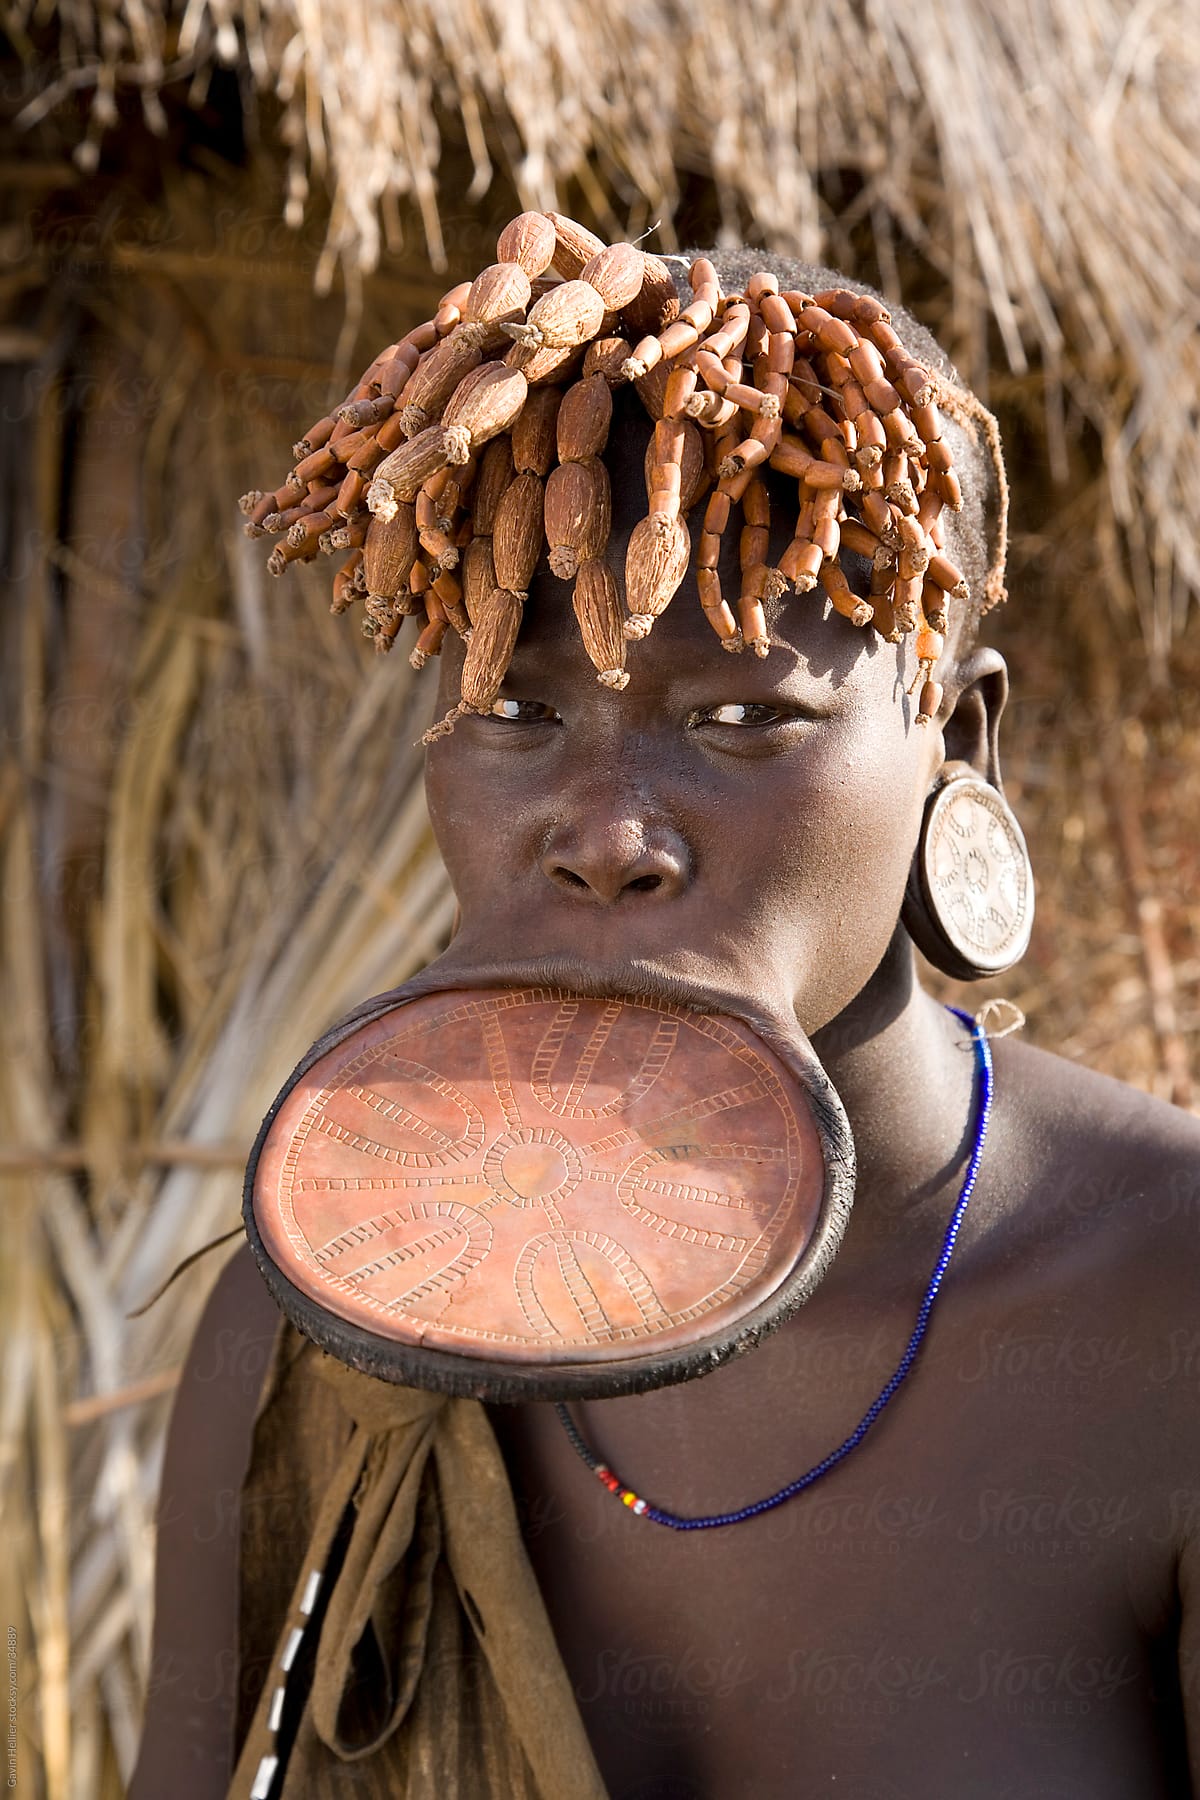 Mursi woman with clay lip plate, Mursi Hills, Mago National Park, Lower Omo Valley, Ethiopia, Africa.